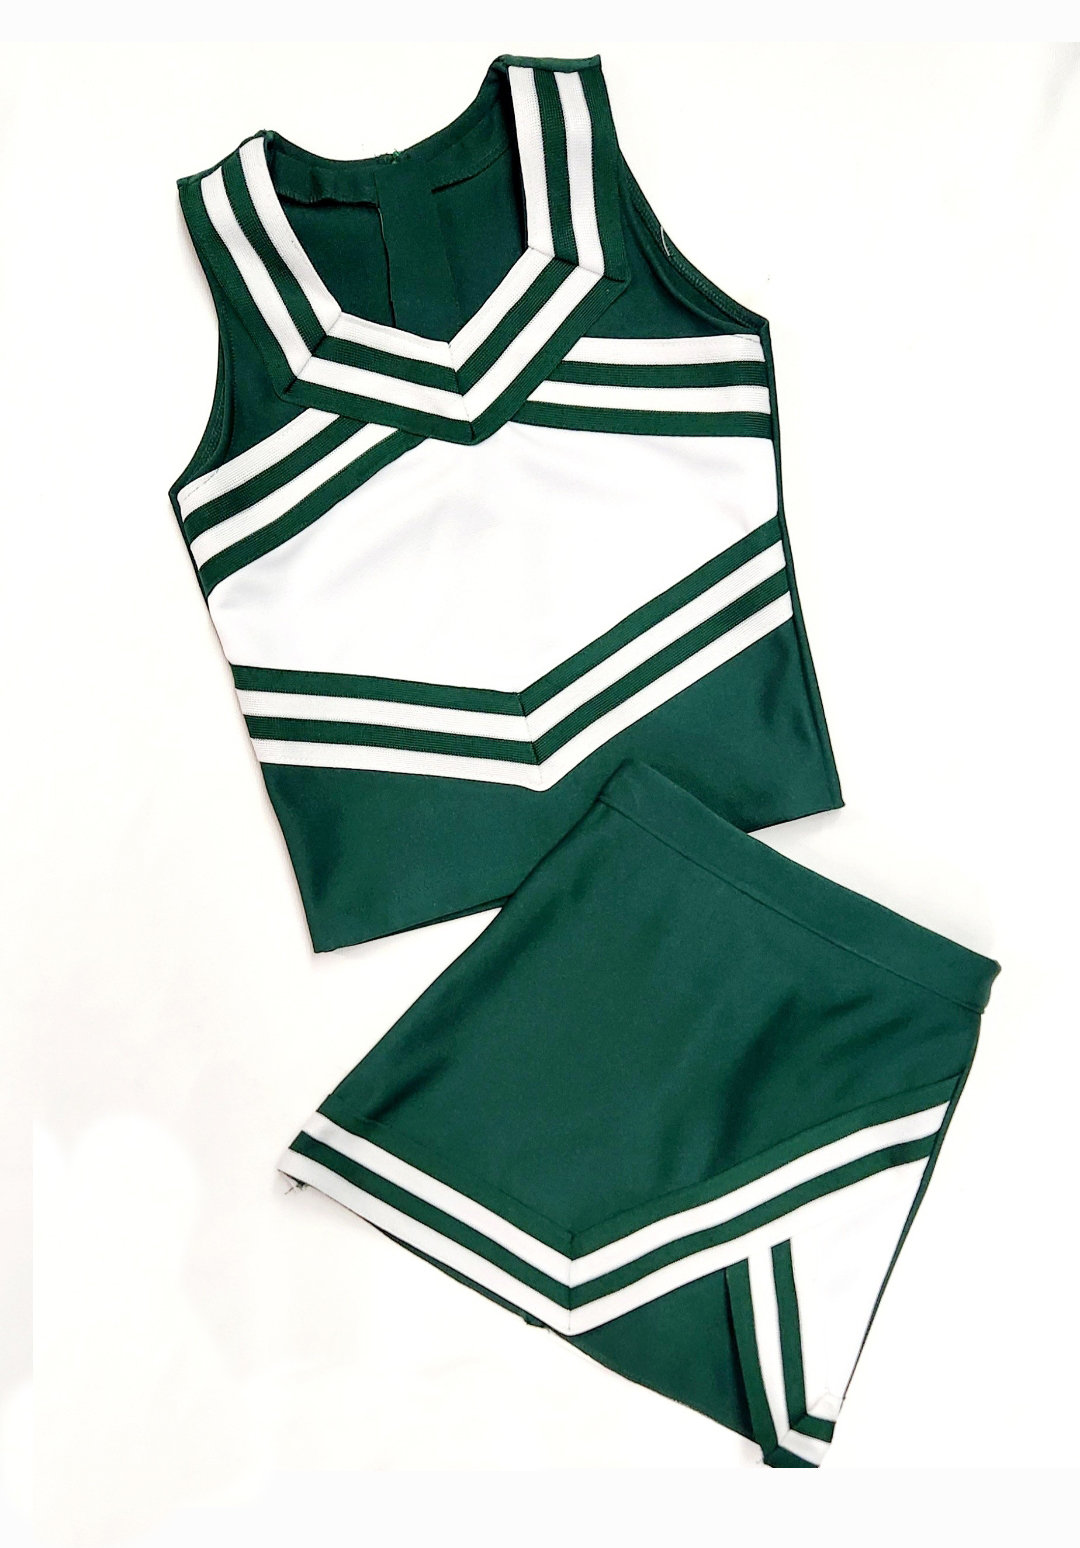  KAKALVER Cheerleader Costume for Girls Cheerleader Outfit with  Pom Poms for Halloween Sports Cheerleader Gifts : Clothing, Shoes & Jewelry